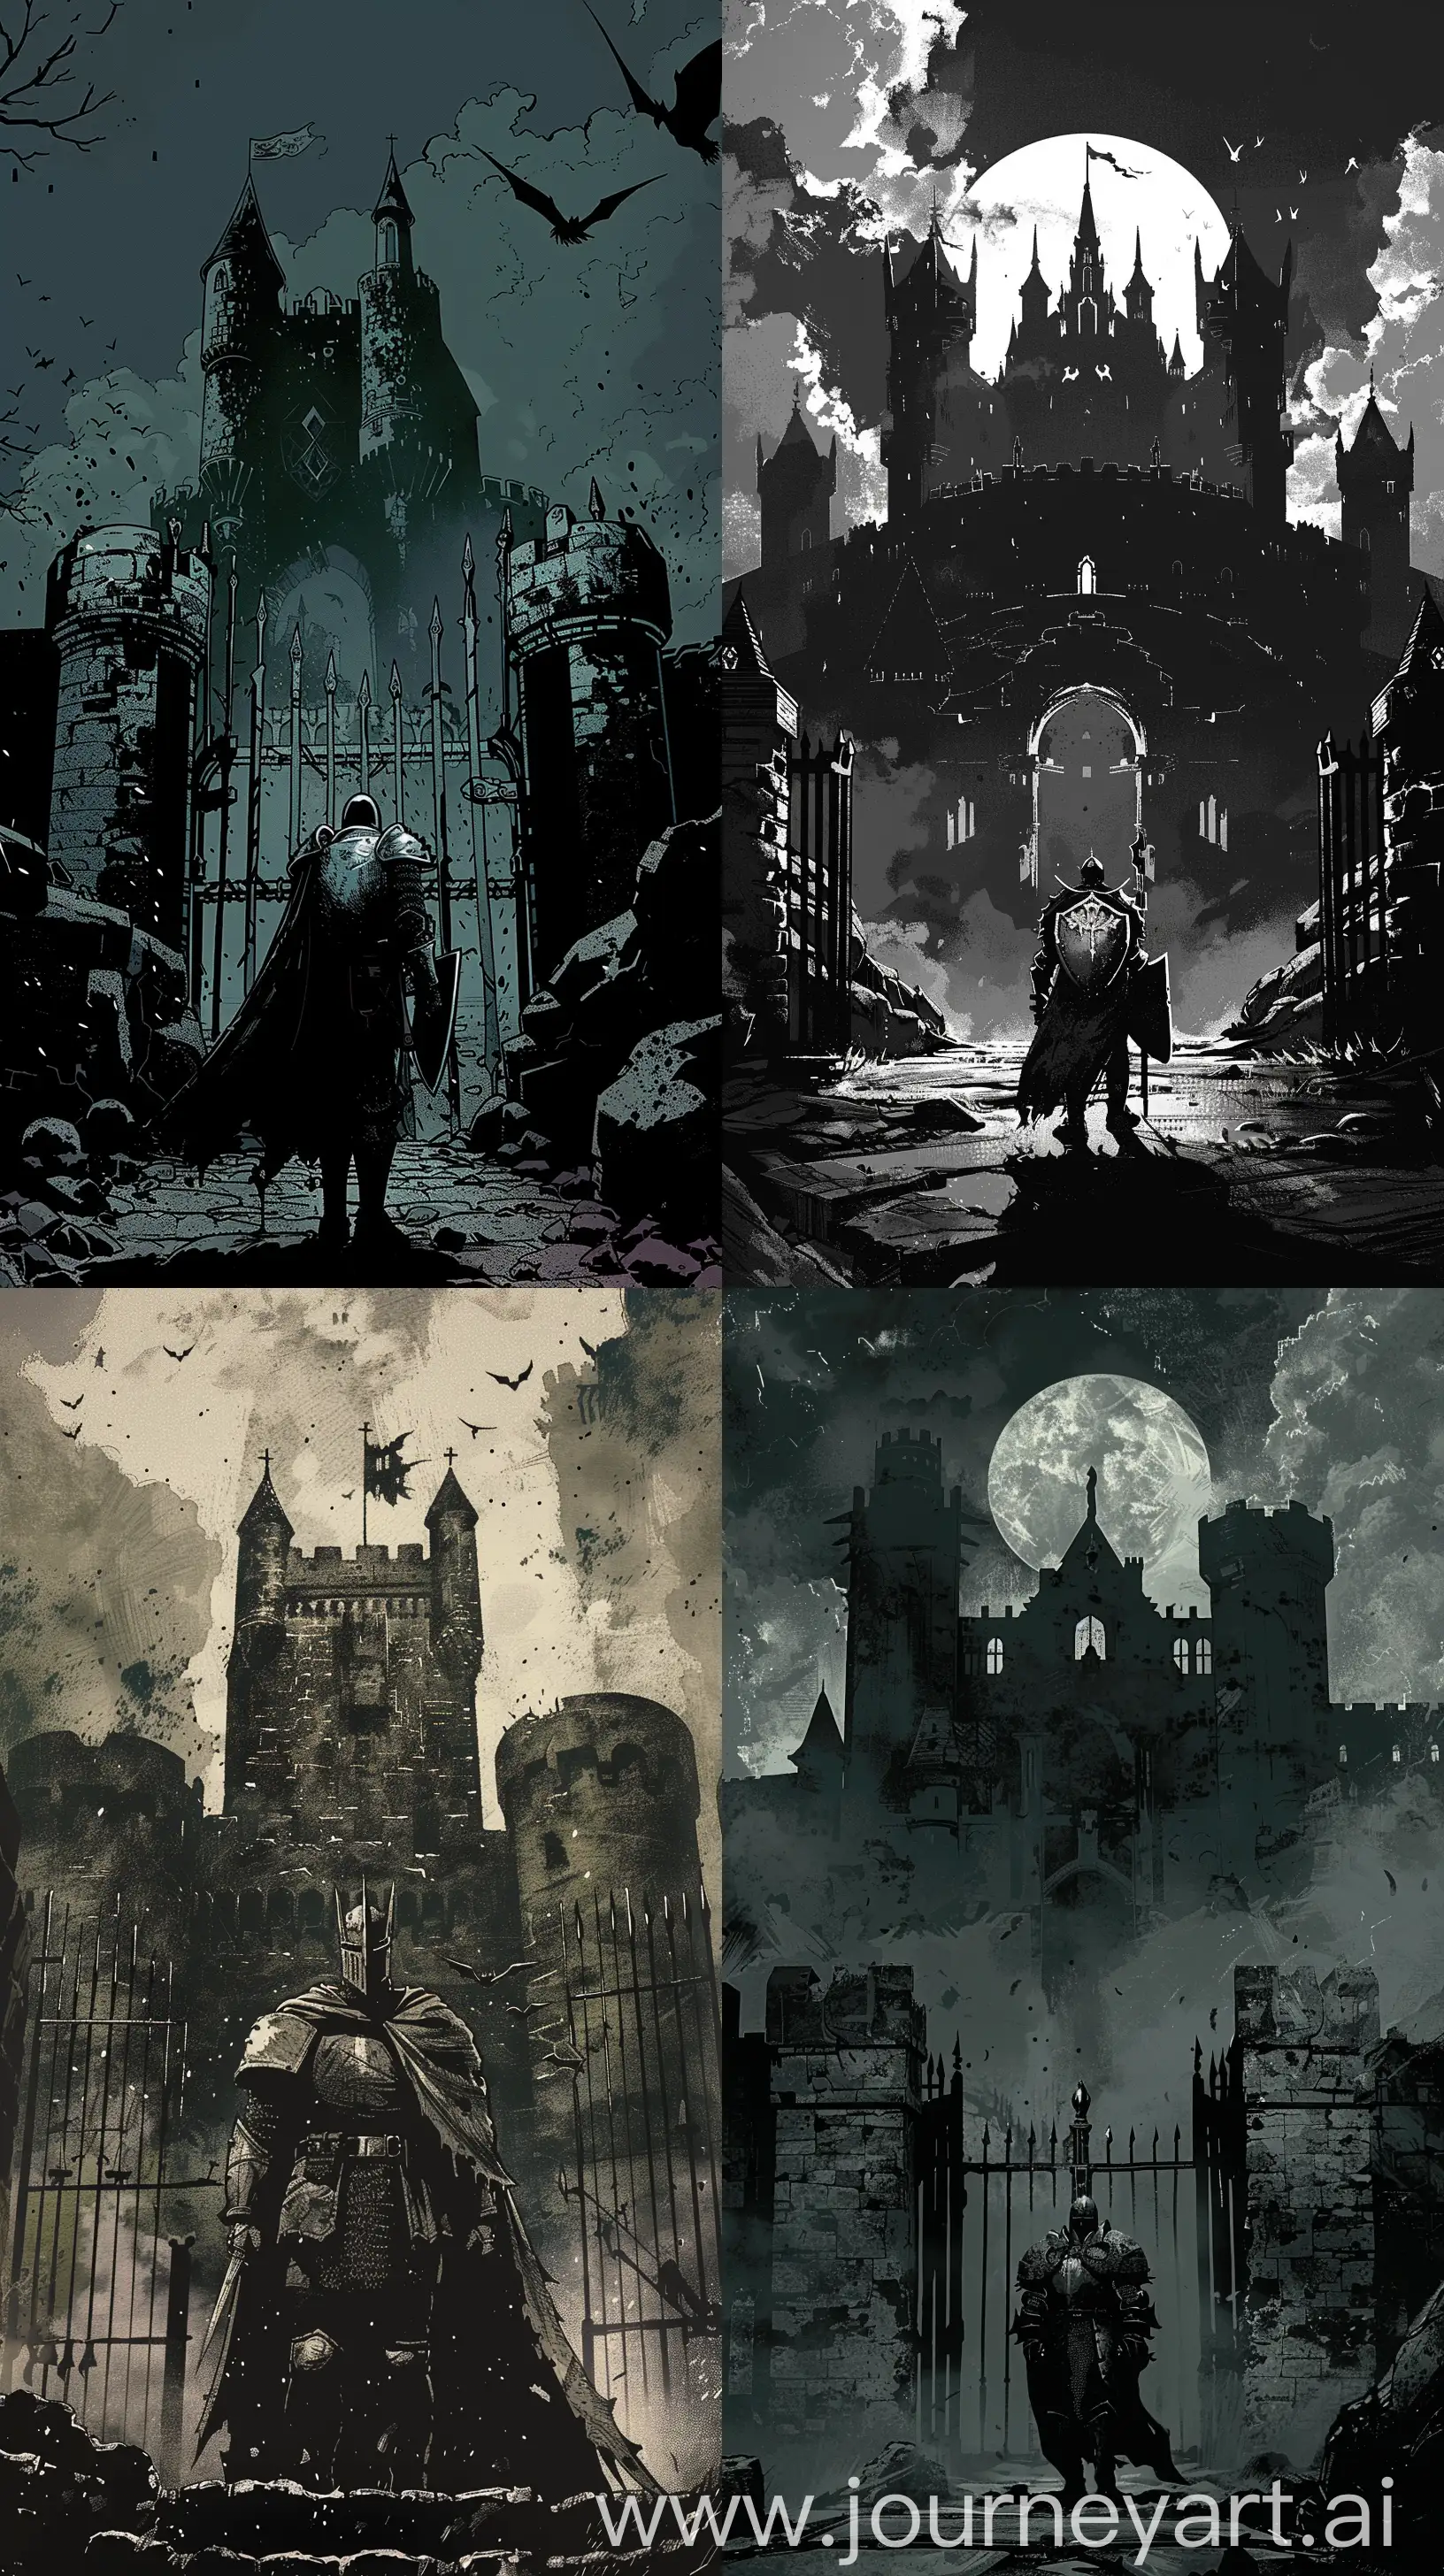 Knight-at-Foreboding-Castle-Dramatic-Monochrome-Art-Inspired-by-Mike-Mignola